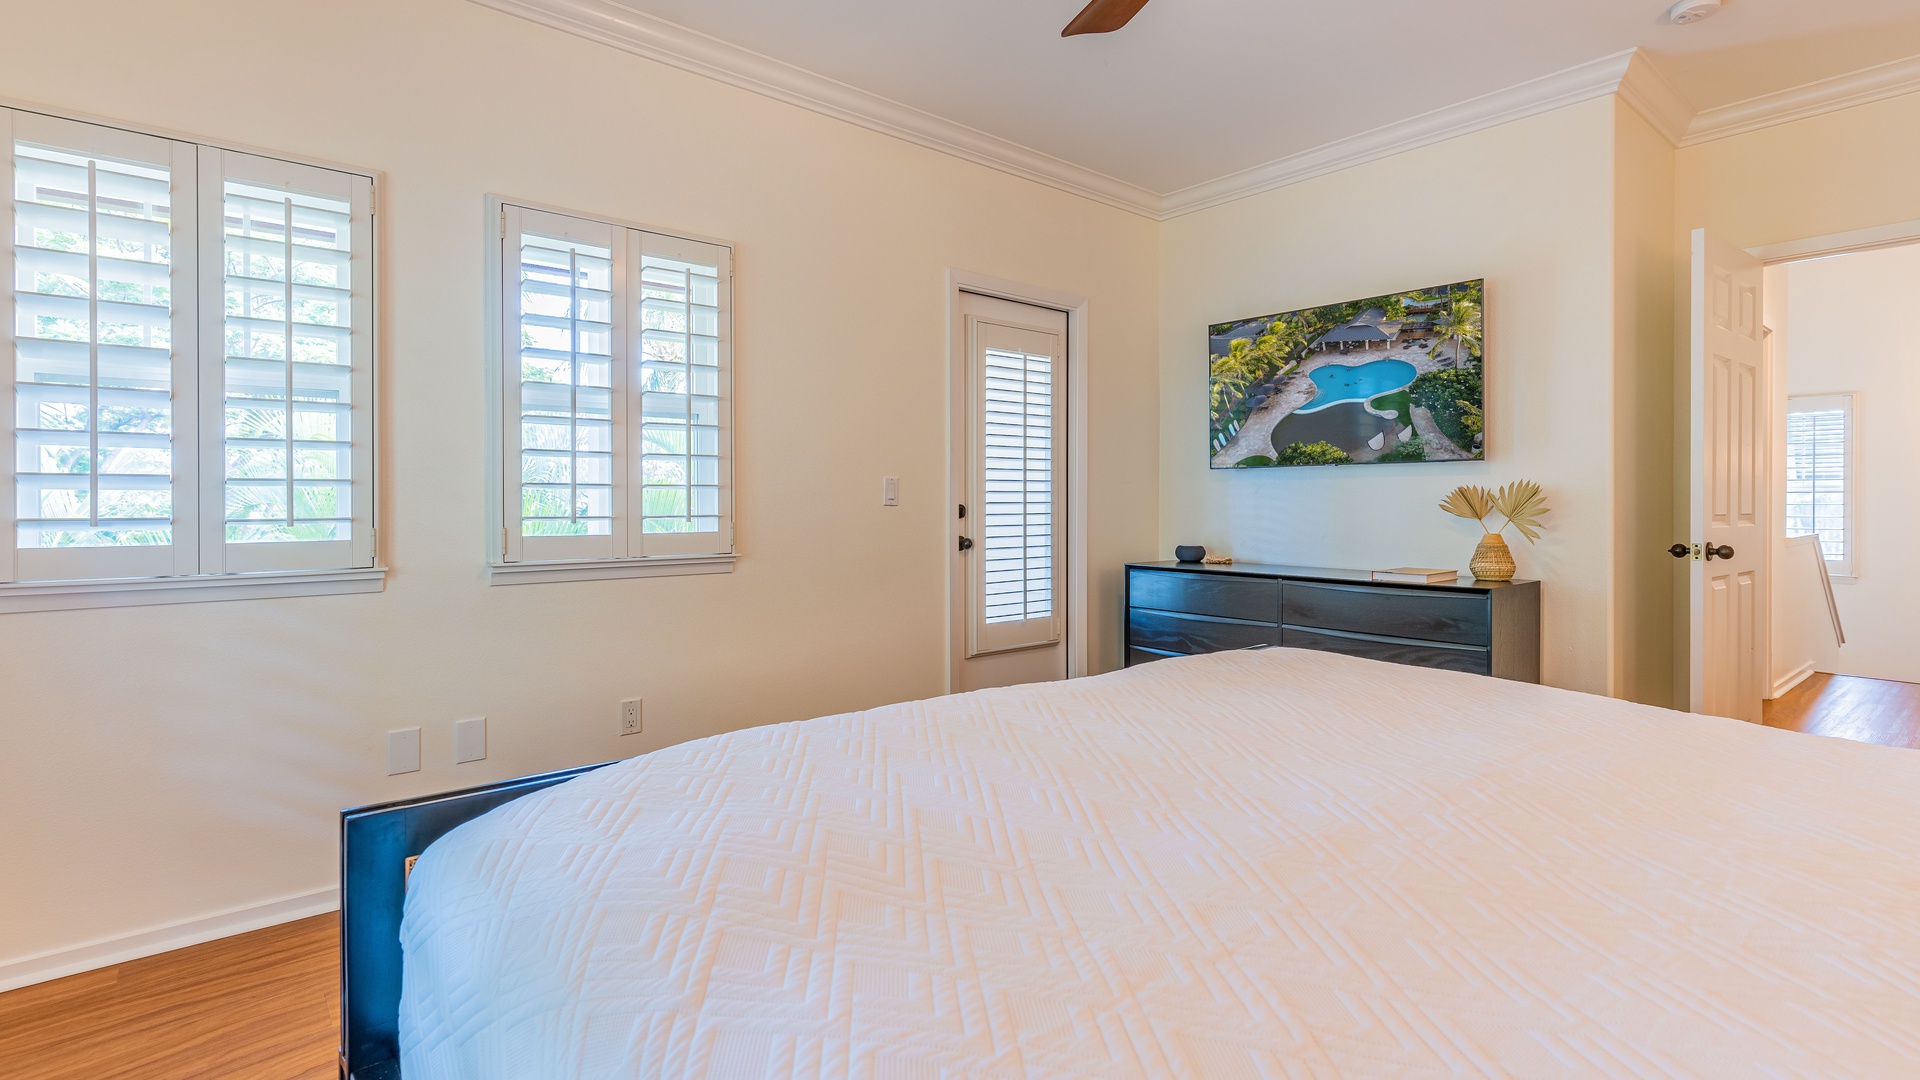 Kapolei Vacation Rentals, Coconut Plantation 1136-4 - The primary guest bedroom with a king bed and television.